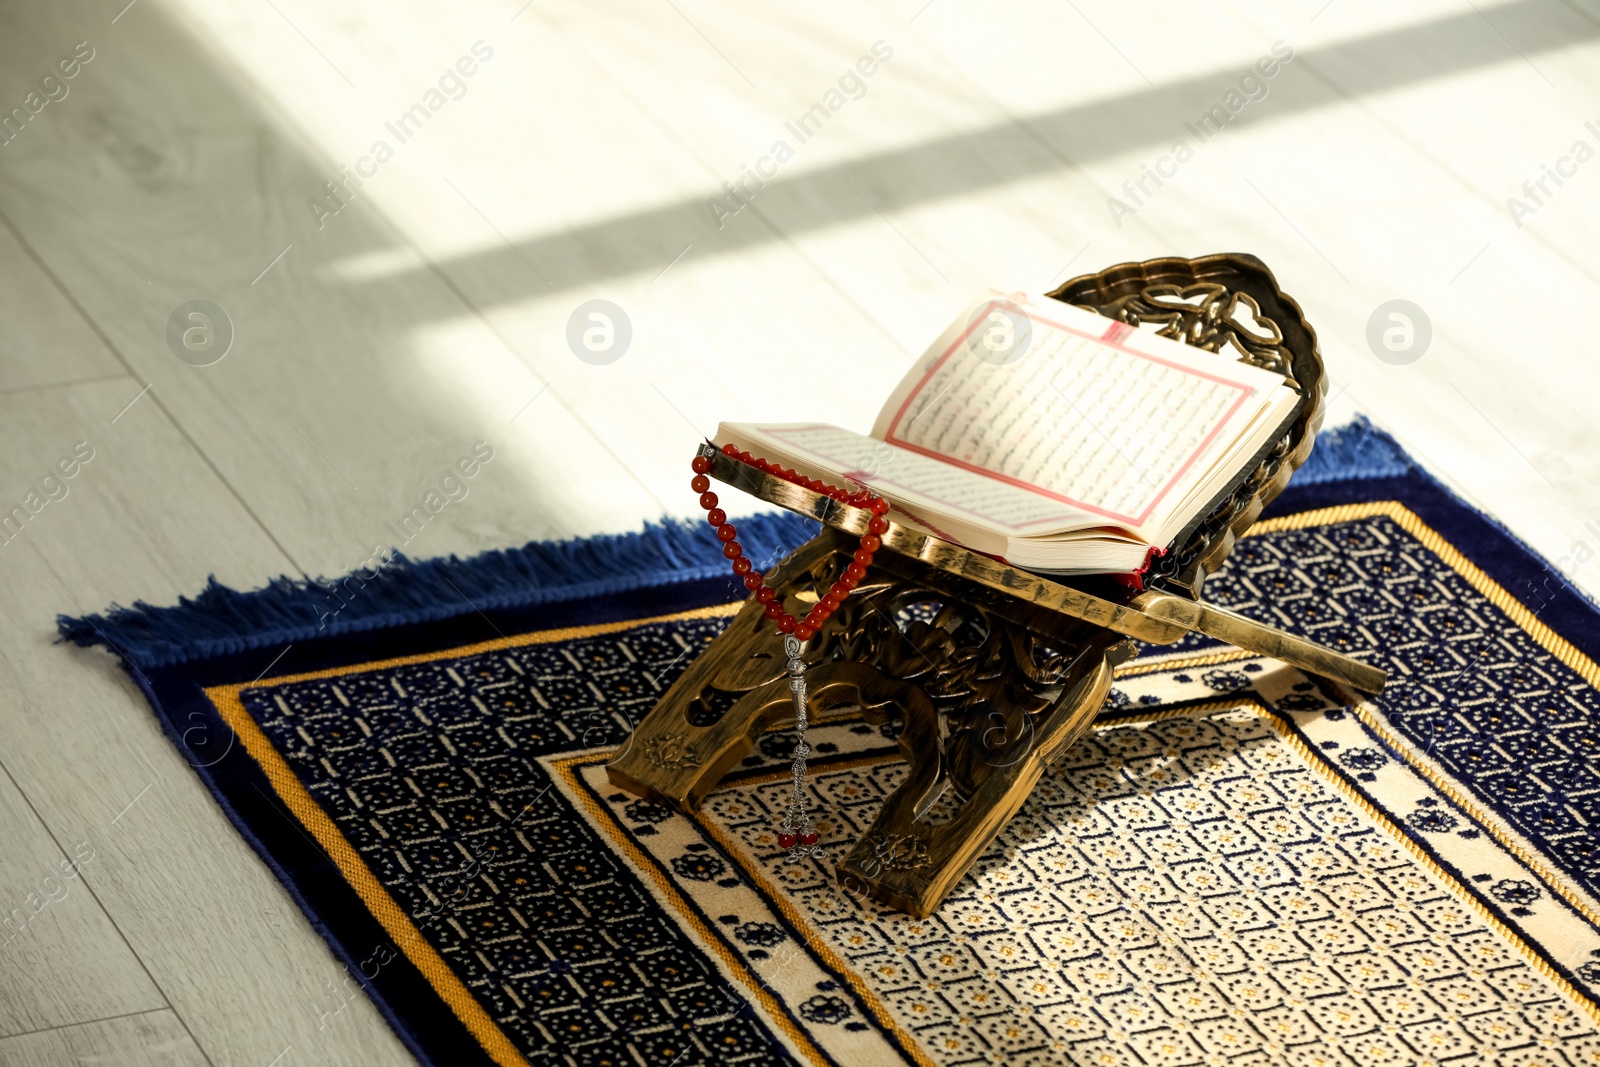 Photo of Rehal with open Quran and Misbaha on Muslim prayer rug indoors, space for text